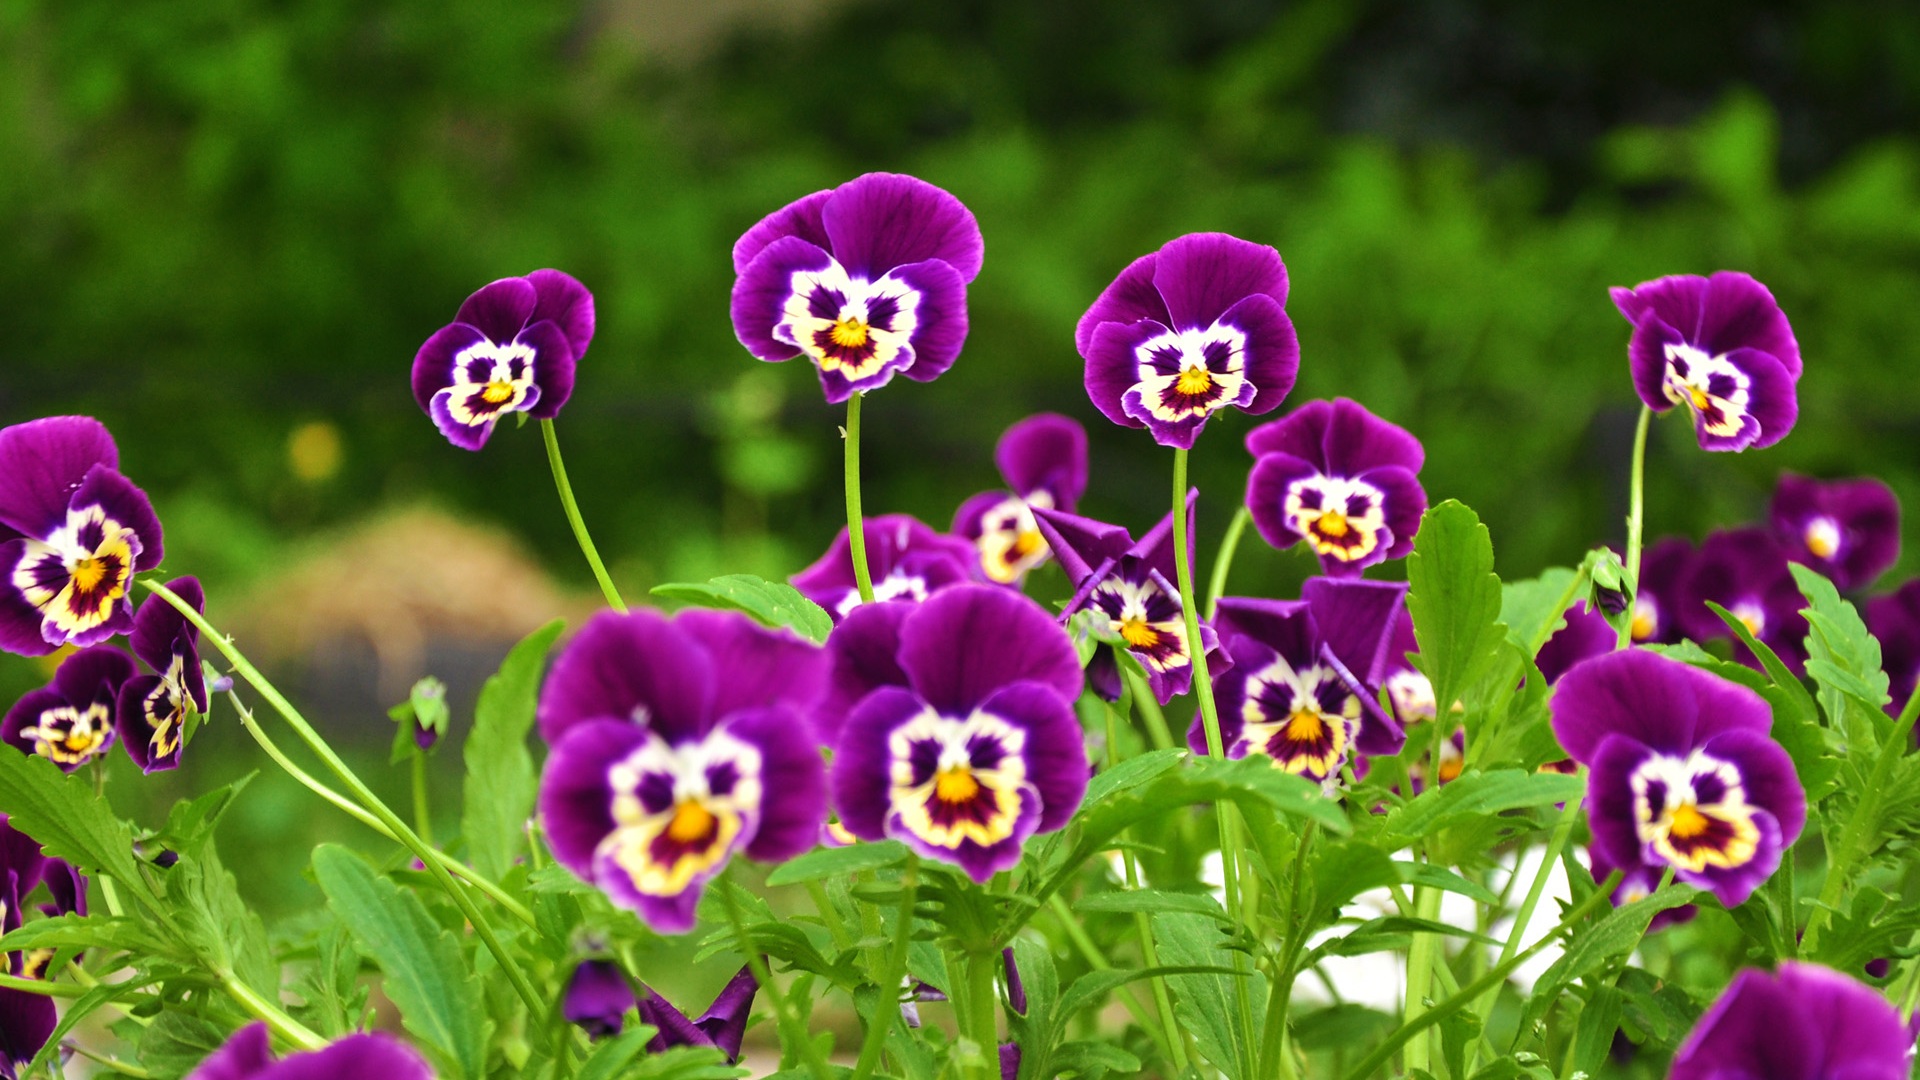 Beautiful Purple Flowers Pictures, Images and Wallpapers | Flower ...